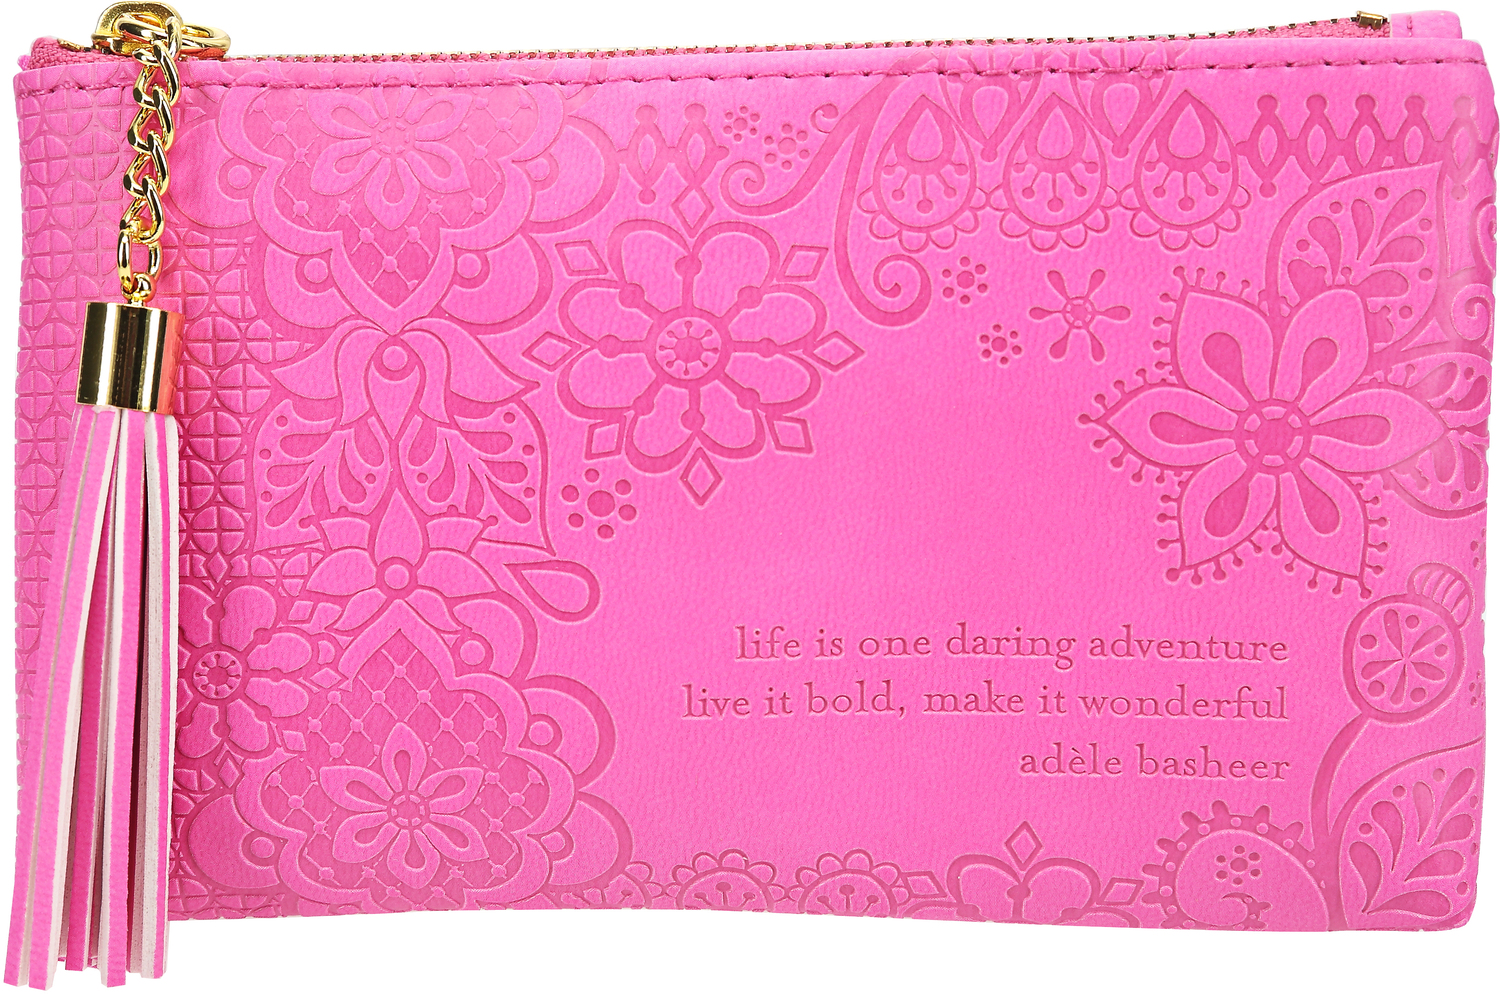 Miami Pink by Intrinsic - Miami Pink - Gift Boxed Vegan Leather Coin Purse